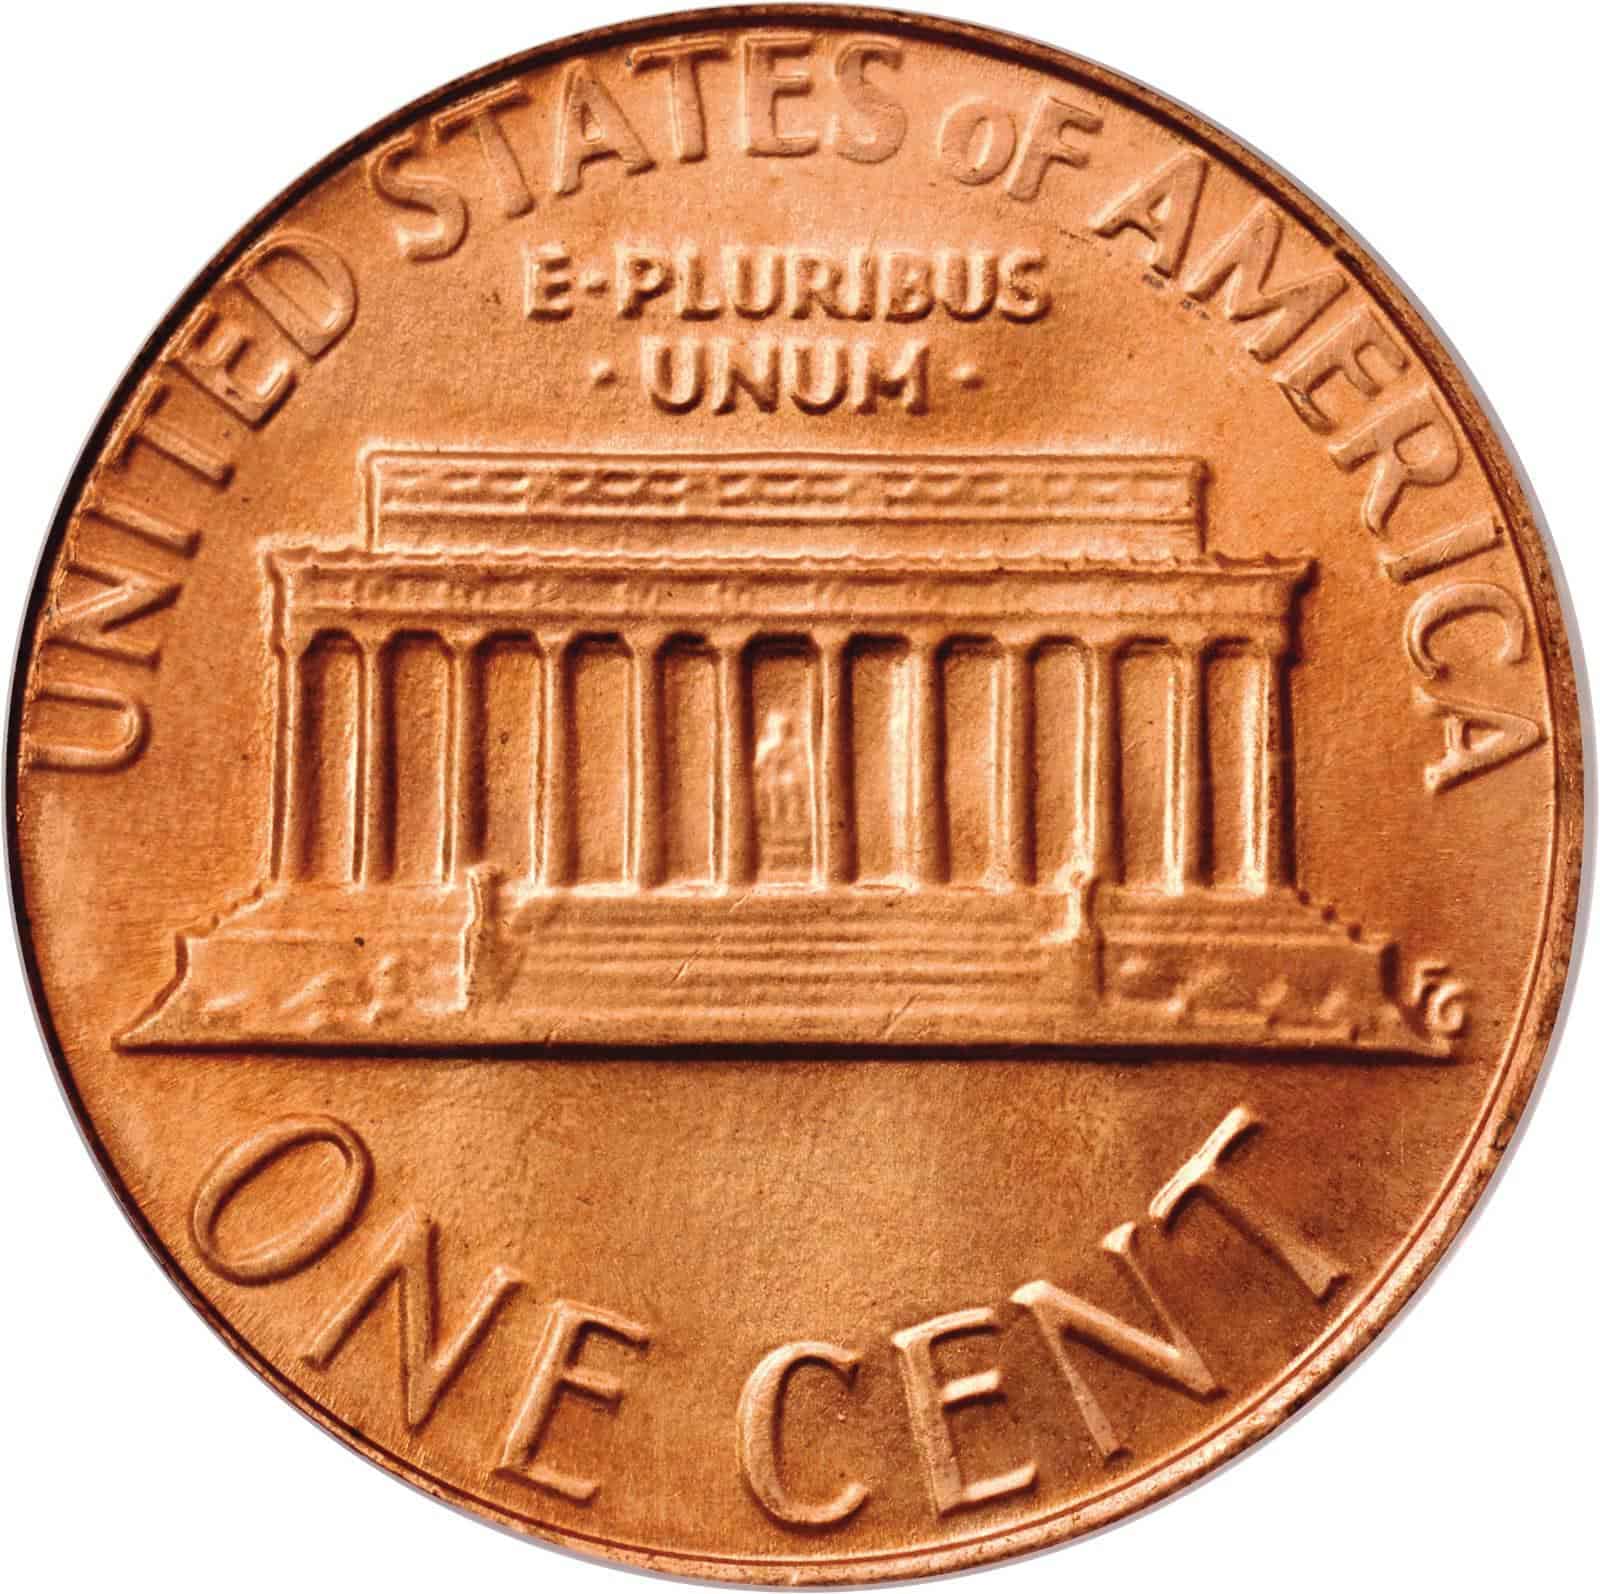 The reverse of the 1984 Lincoln penny